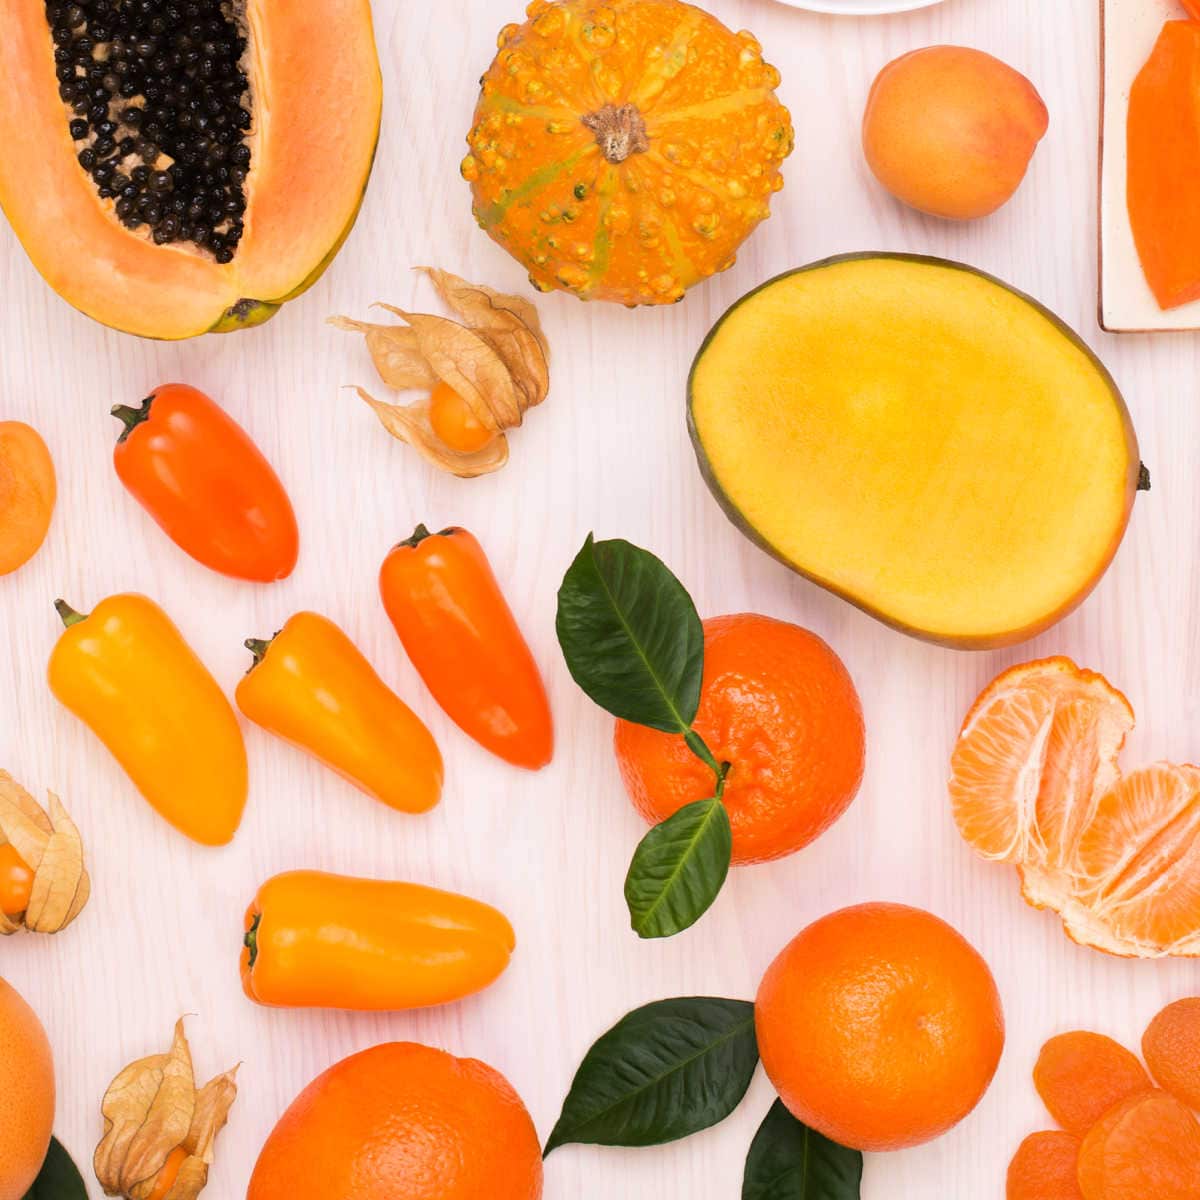 17 Different Orange Fruits You'll Love - Insanely Good